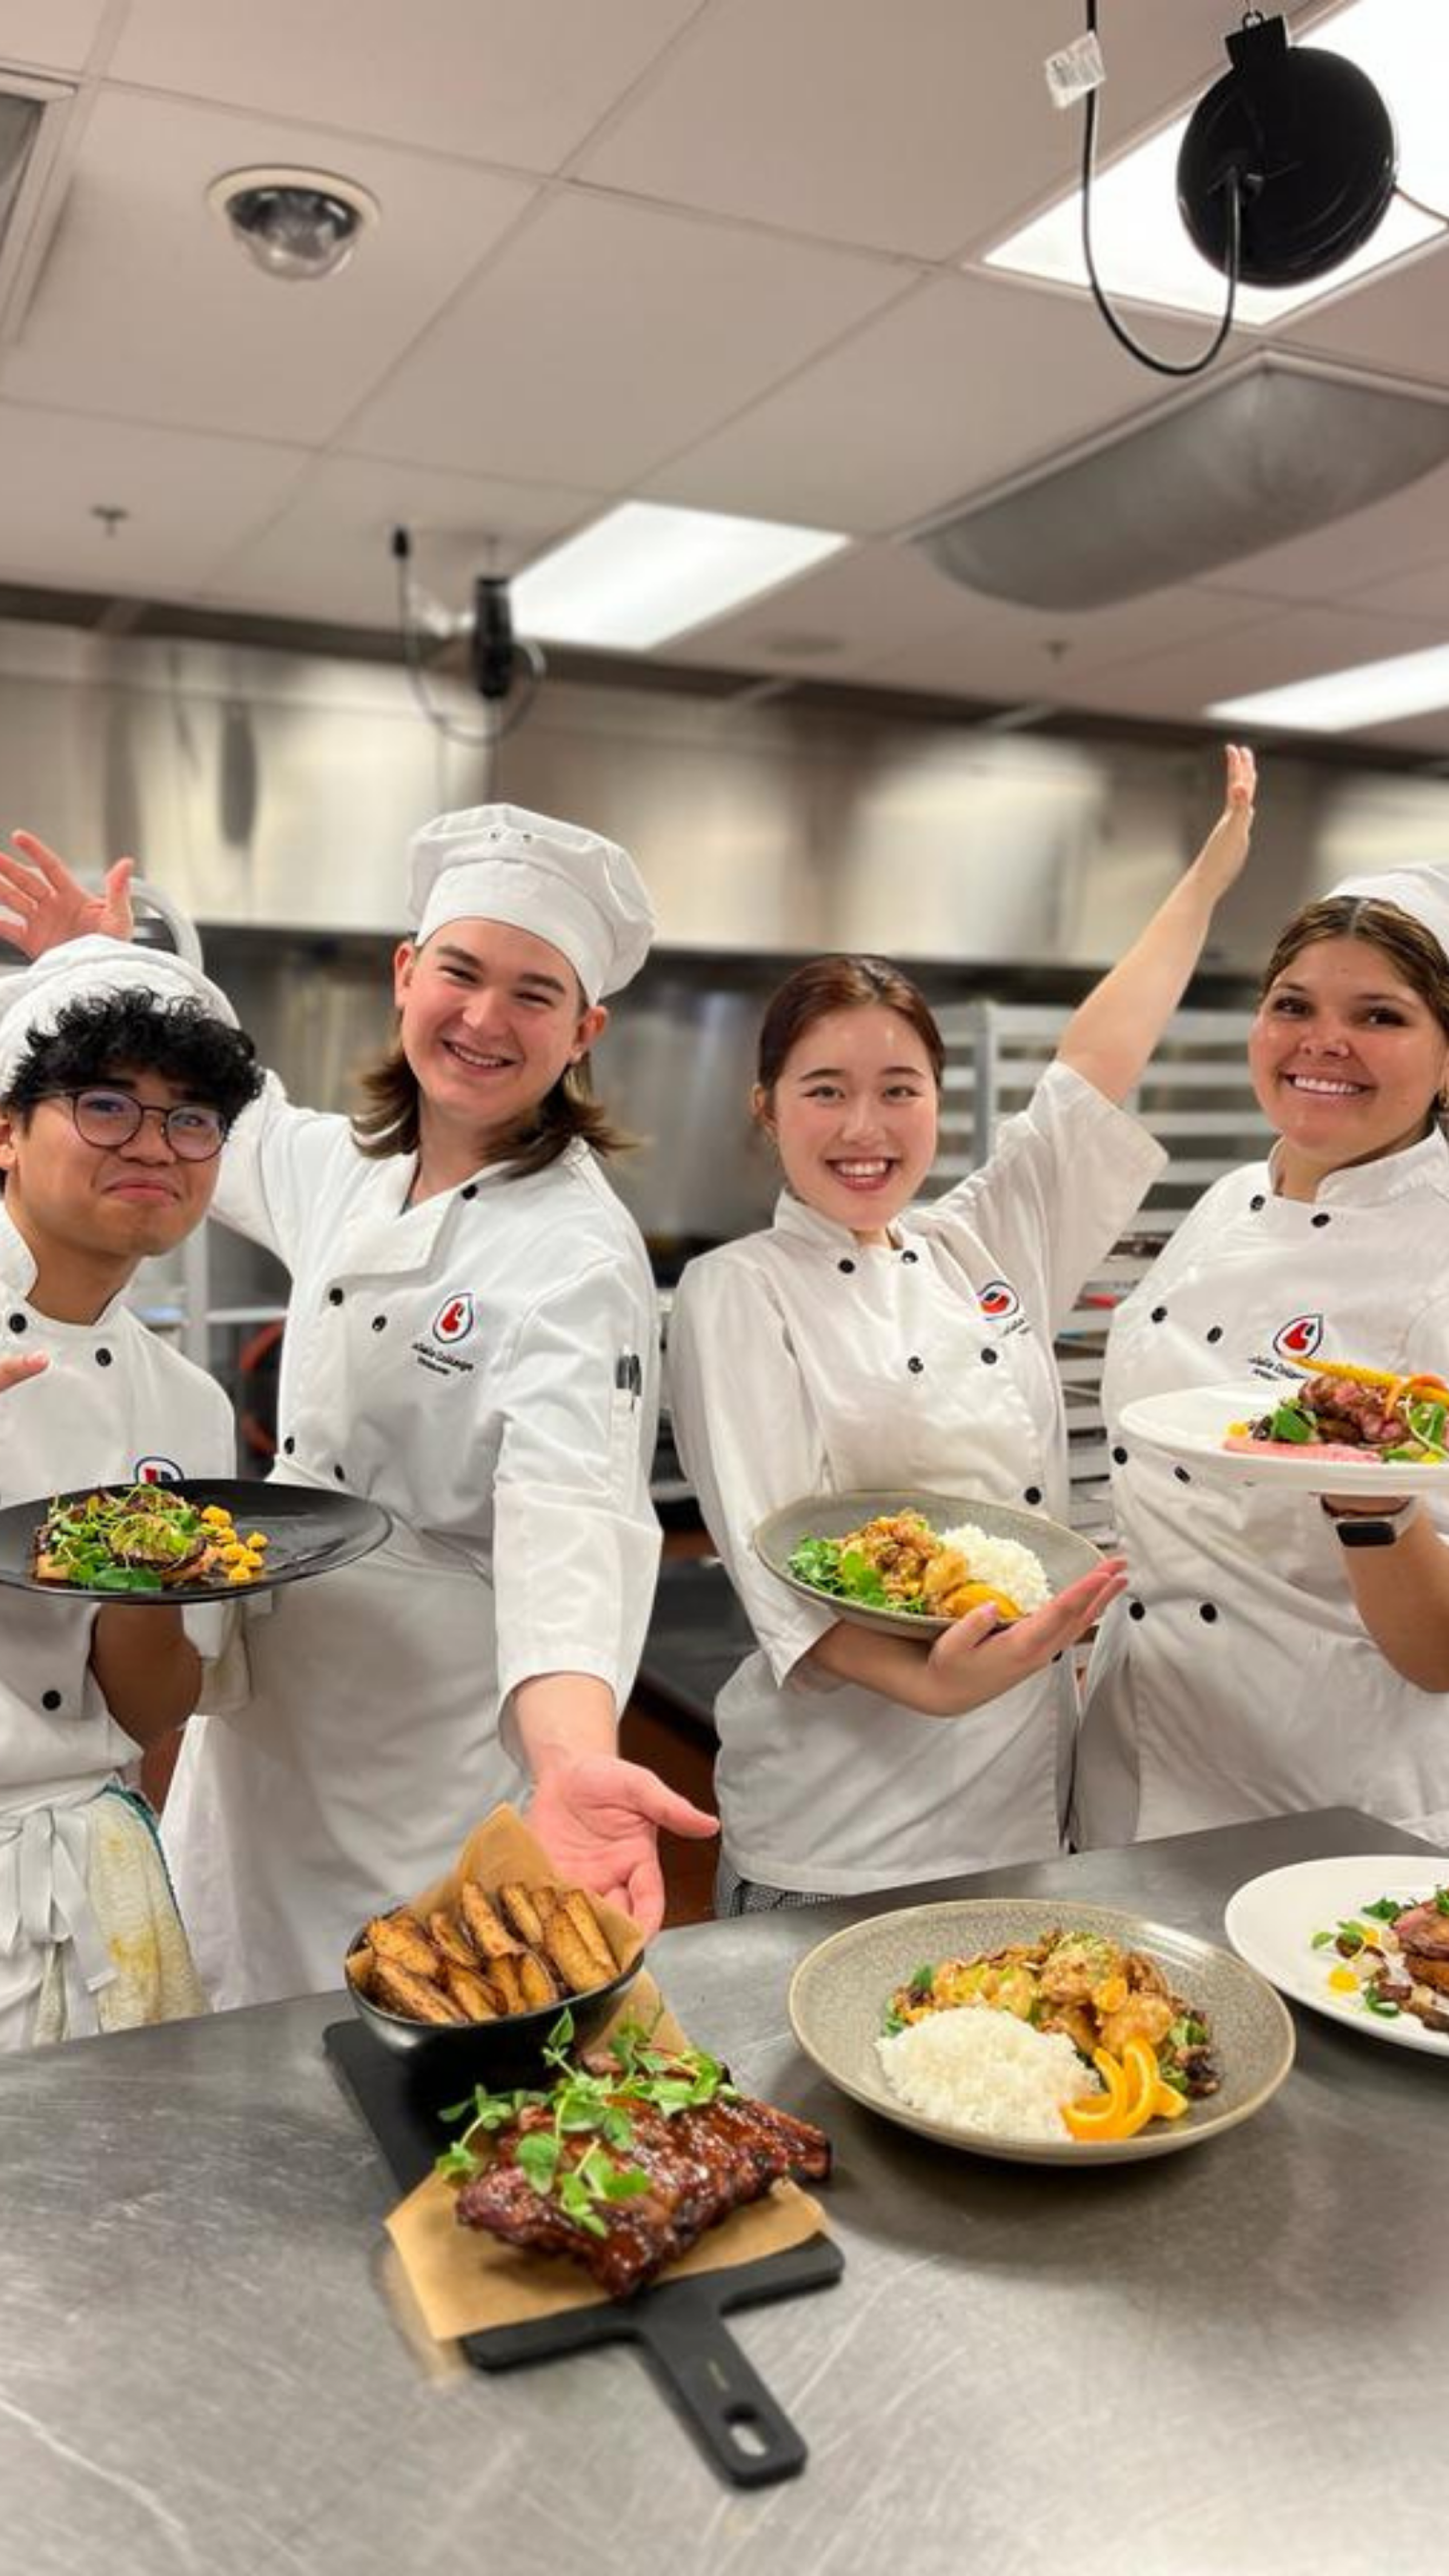 Four smiling culinary students in white chef uniforms proudly display an assortment of cooked dishes in a professional kitchen.